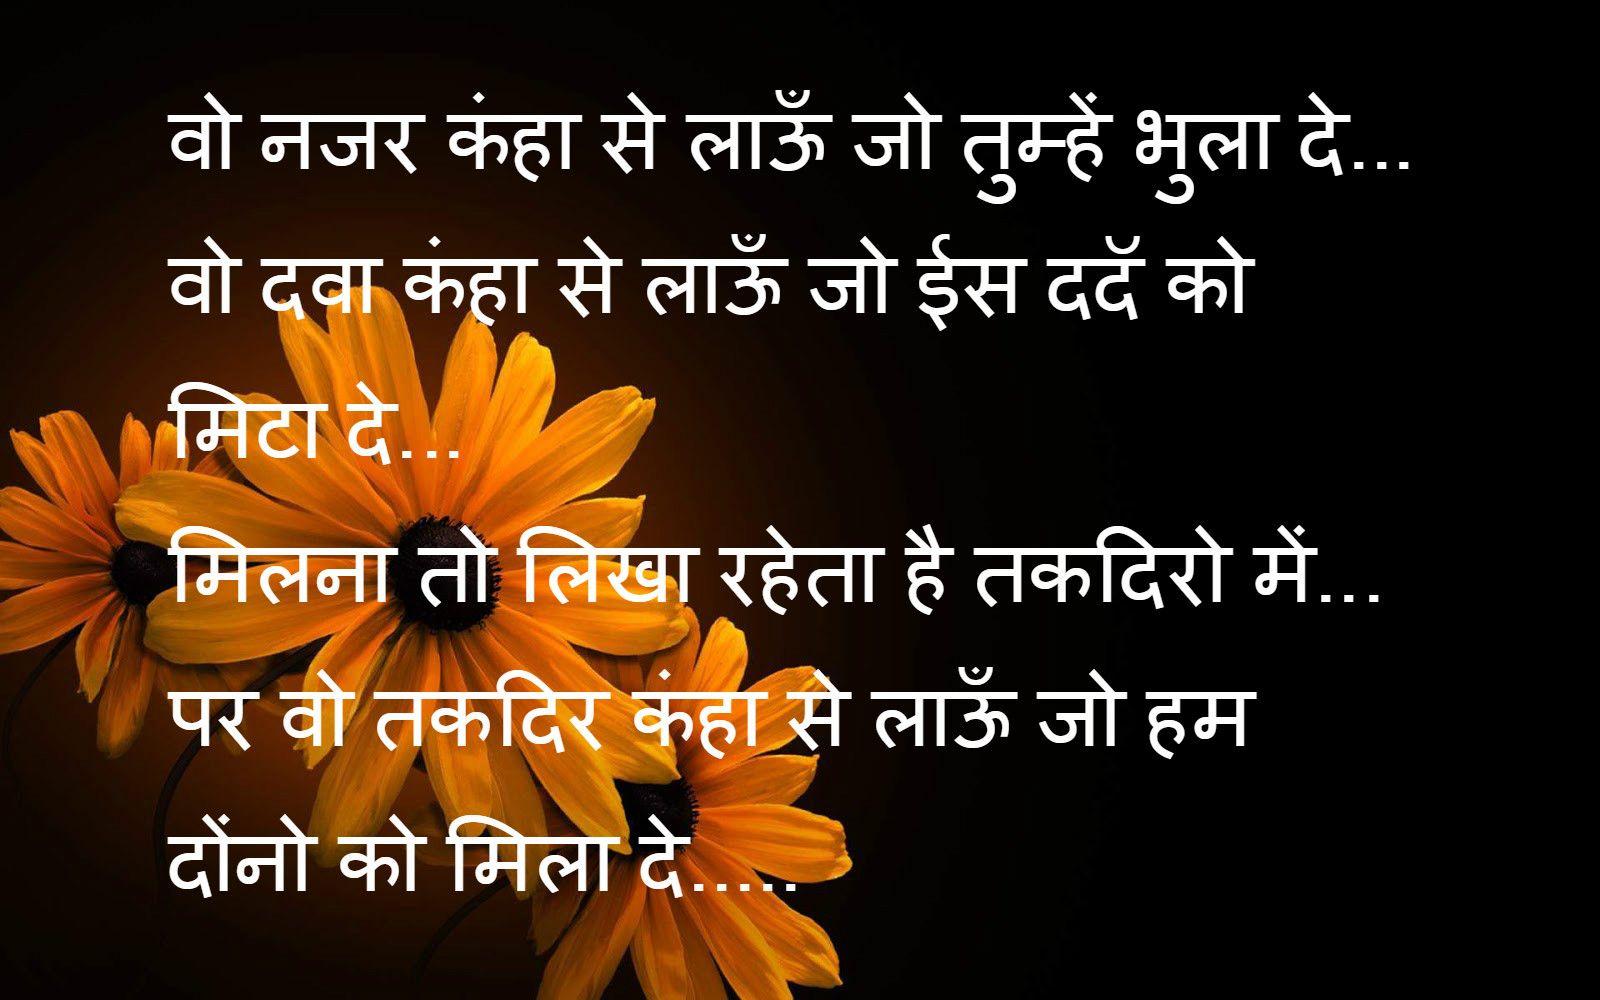 Tons of awesome Islamic Sher Shayari wallpapers in hindi to download for fr...